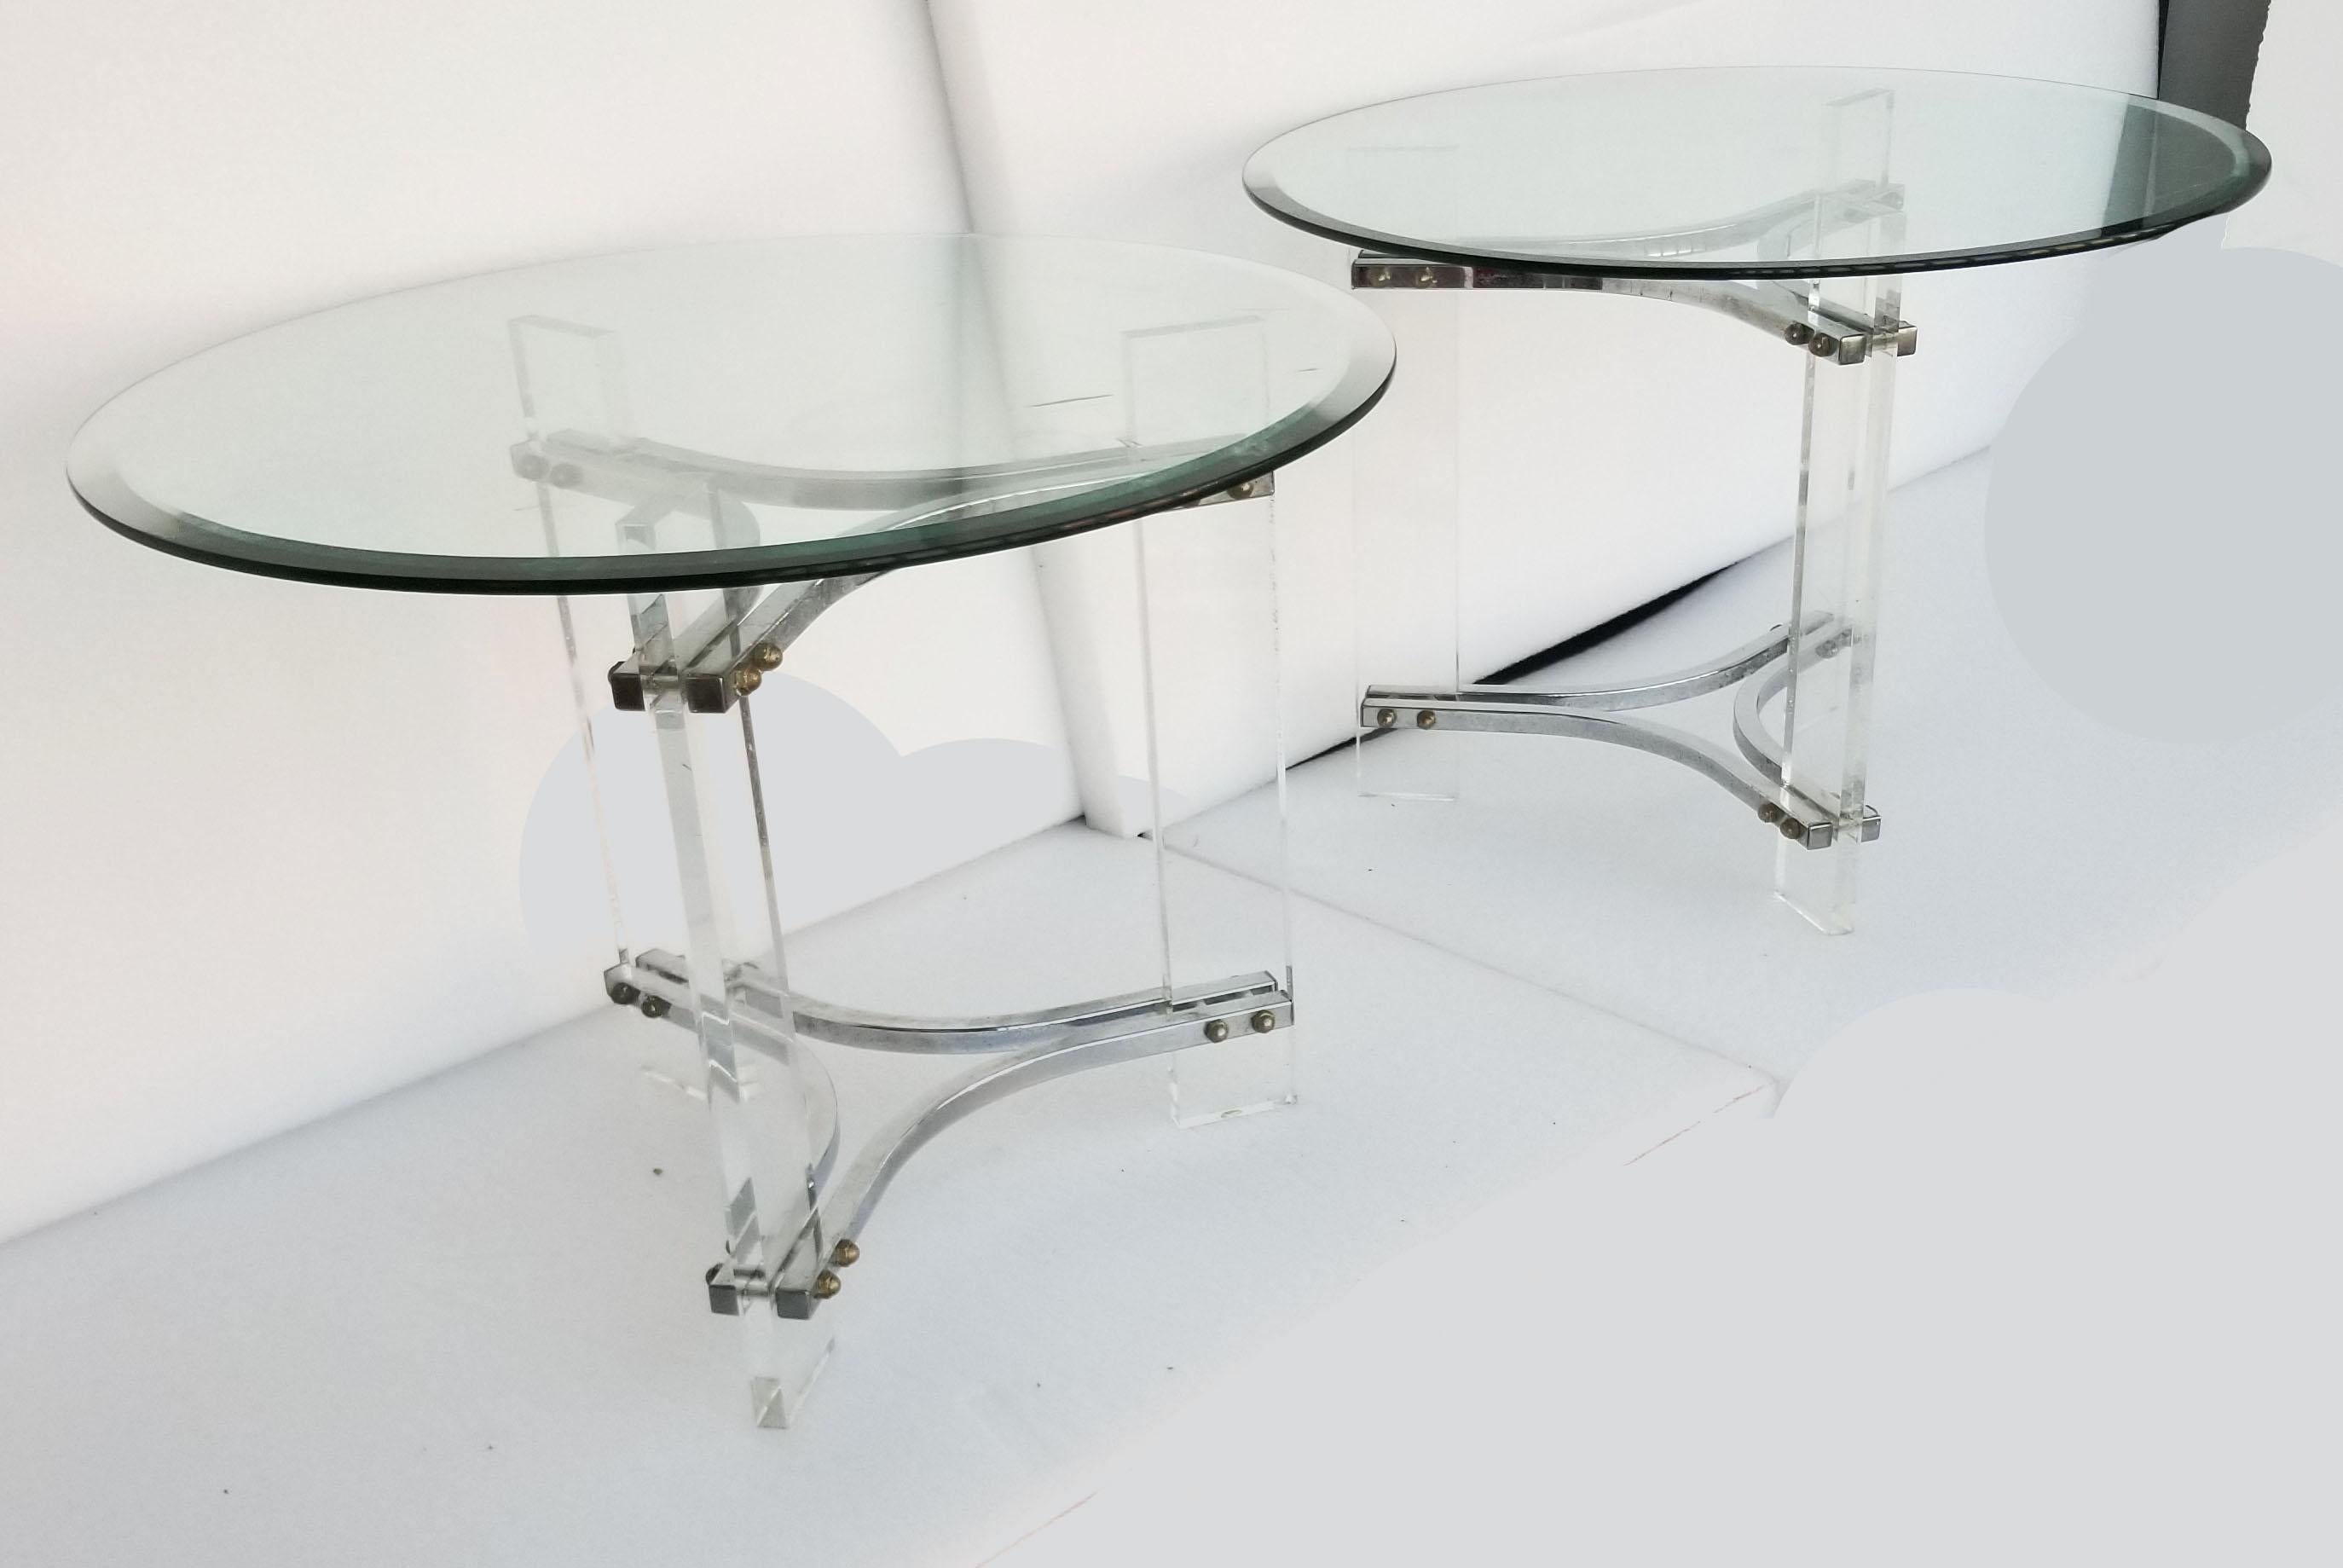 Superb pair of Lucite and chrome round side tables in the style of Charles Hollis Jones.
Diameter of the base without the glass: 18 inches.